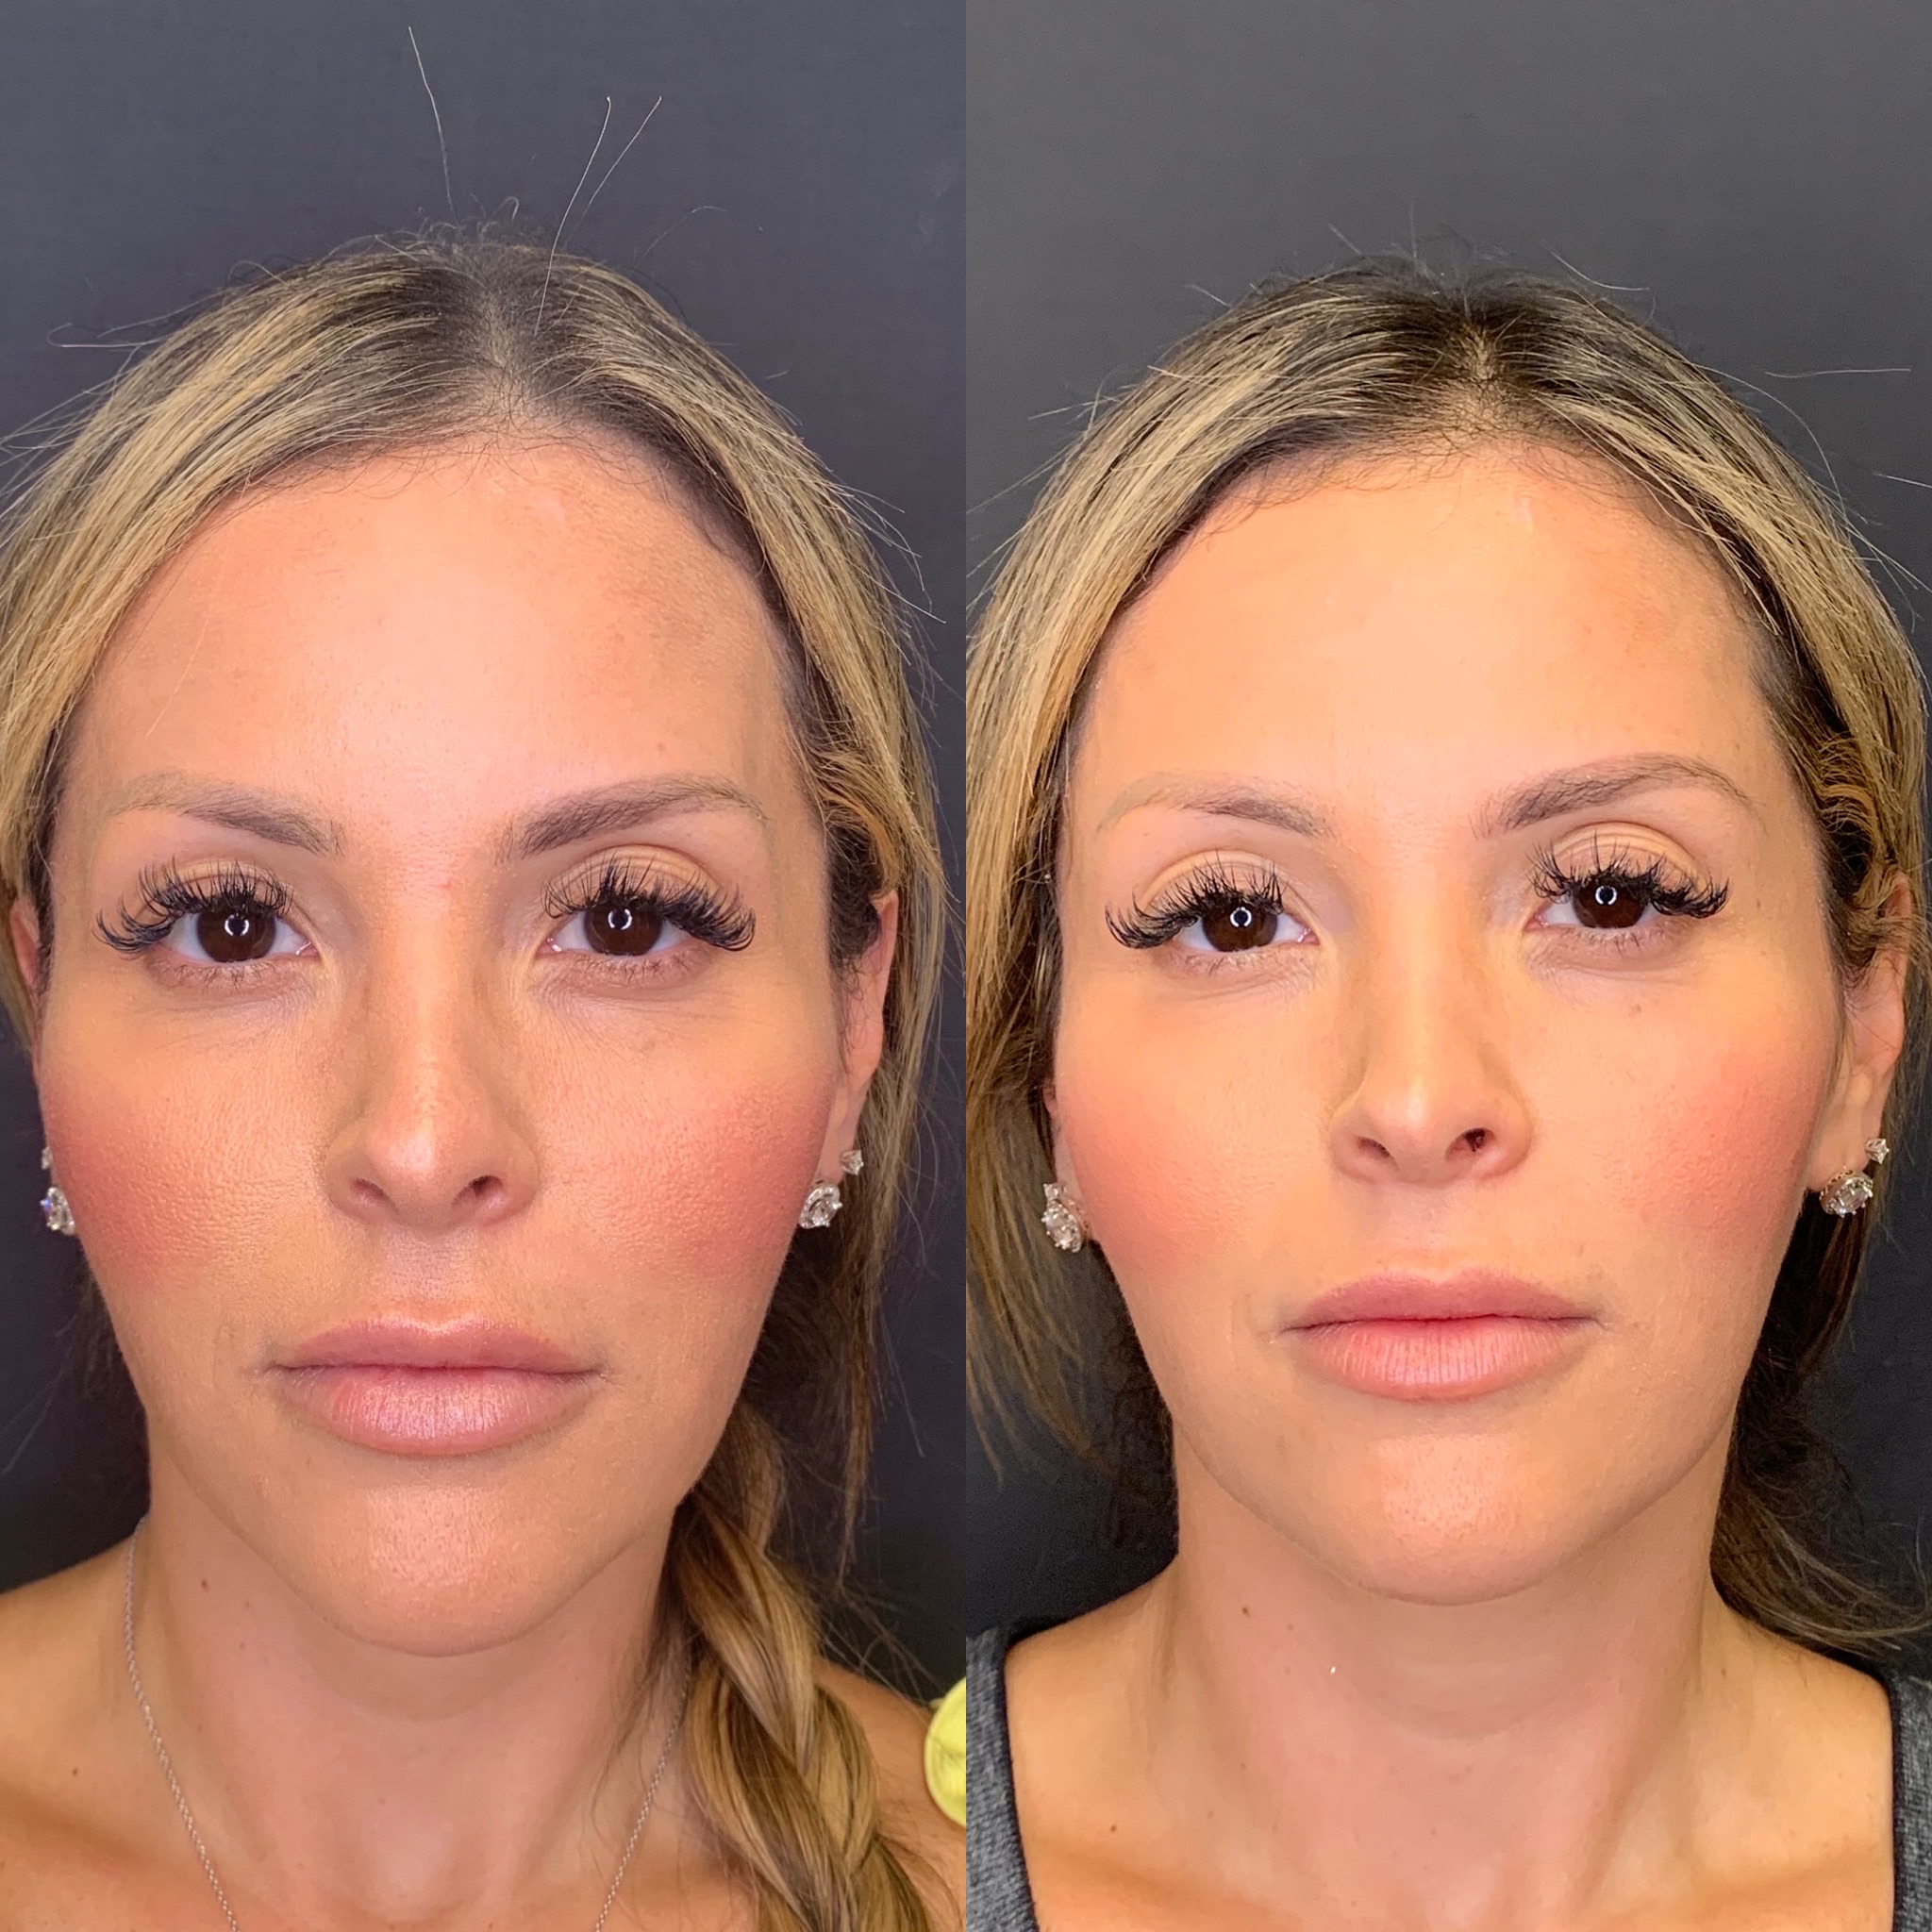 Before and After Temple Fillers Treatment | Beauty Boost Med Spa in Newport Beach, CA